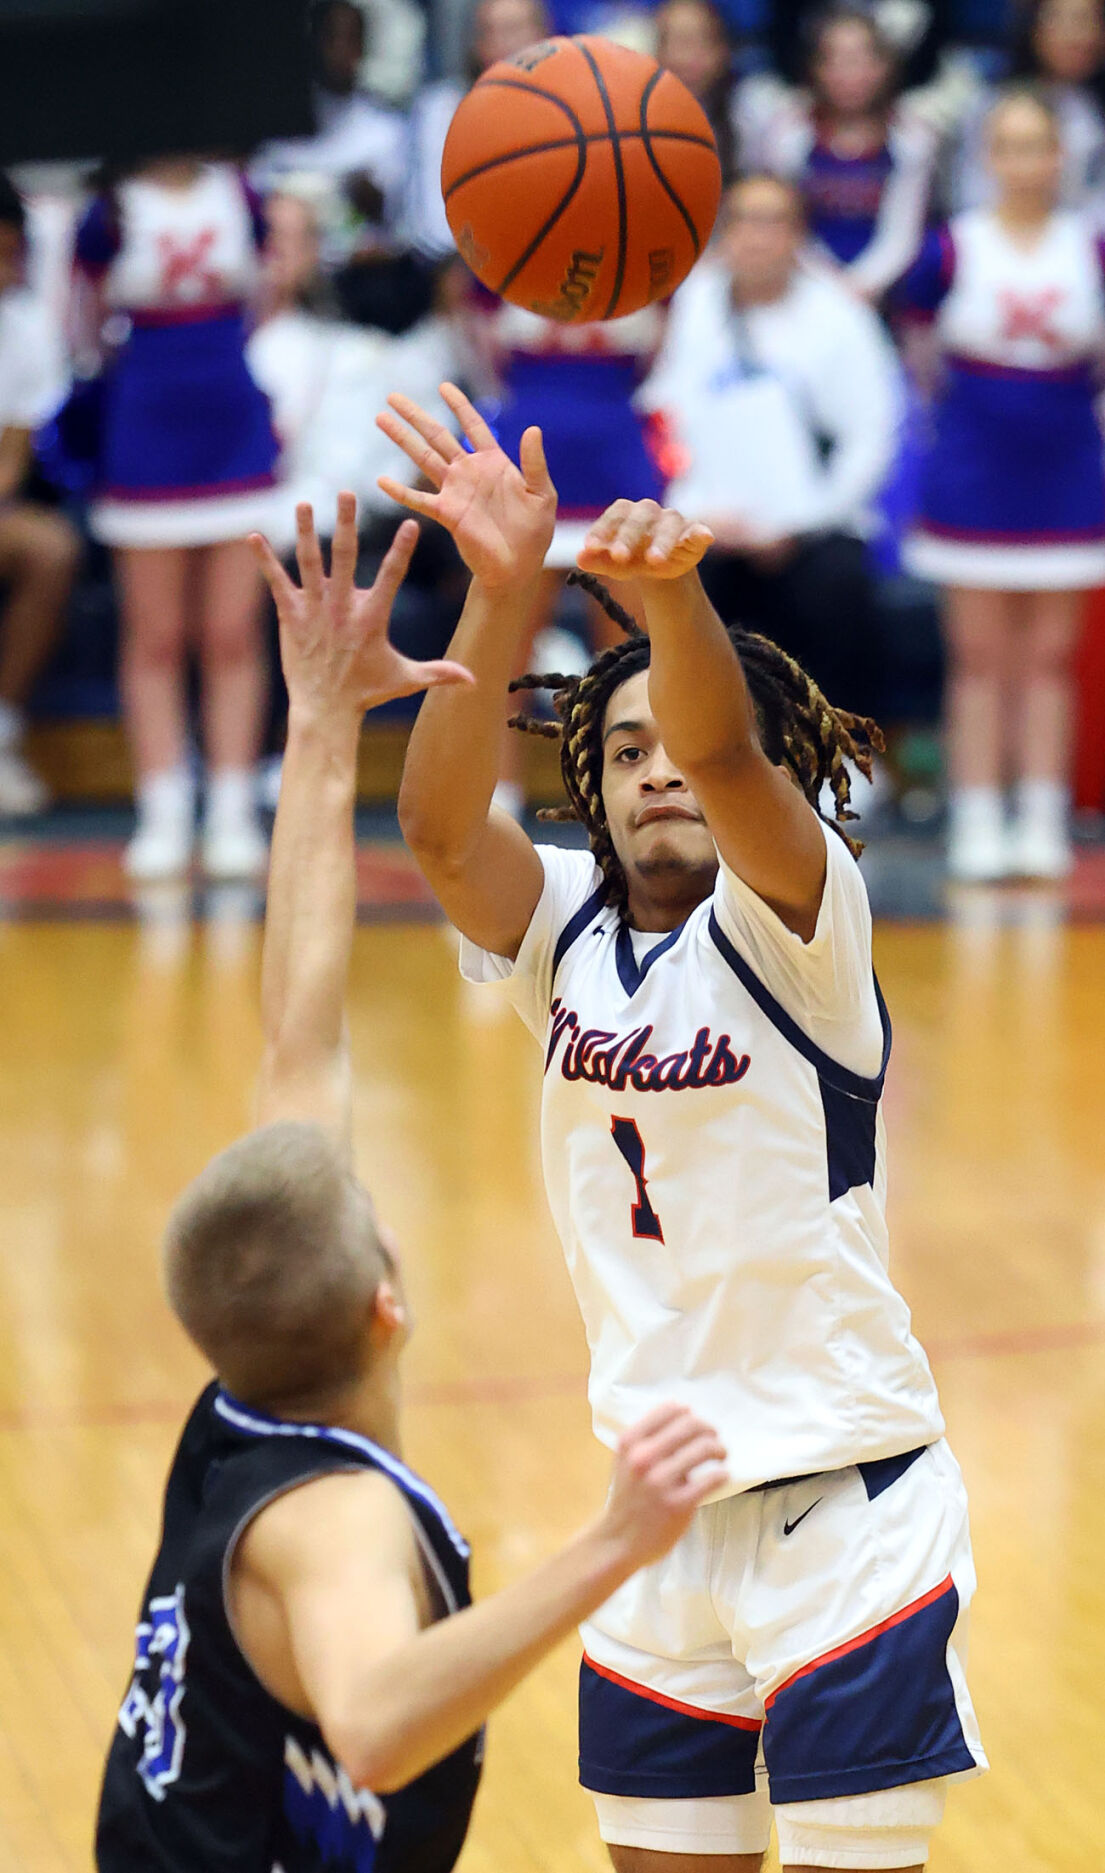 Kokomo Wildkats Gear Up for Back-to-Back NCC Title Against Anderson Indians